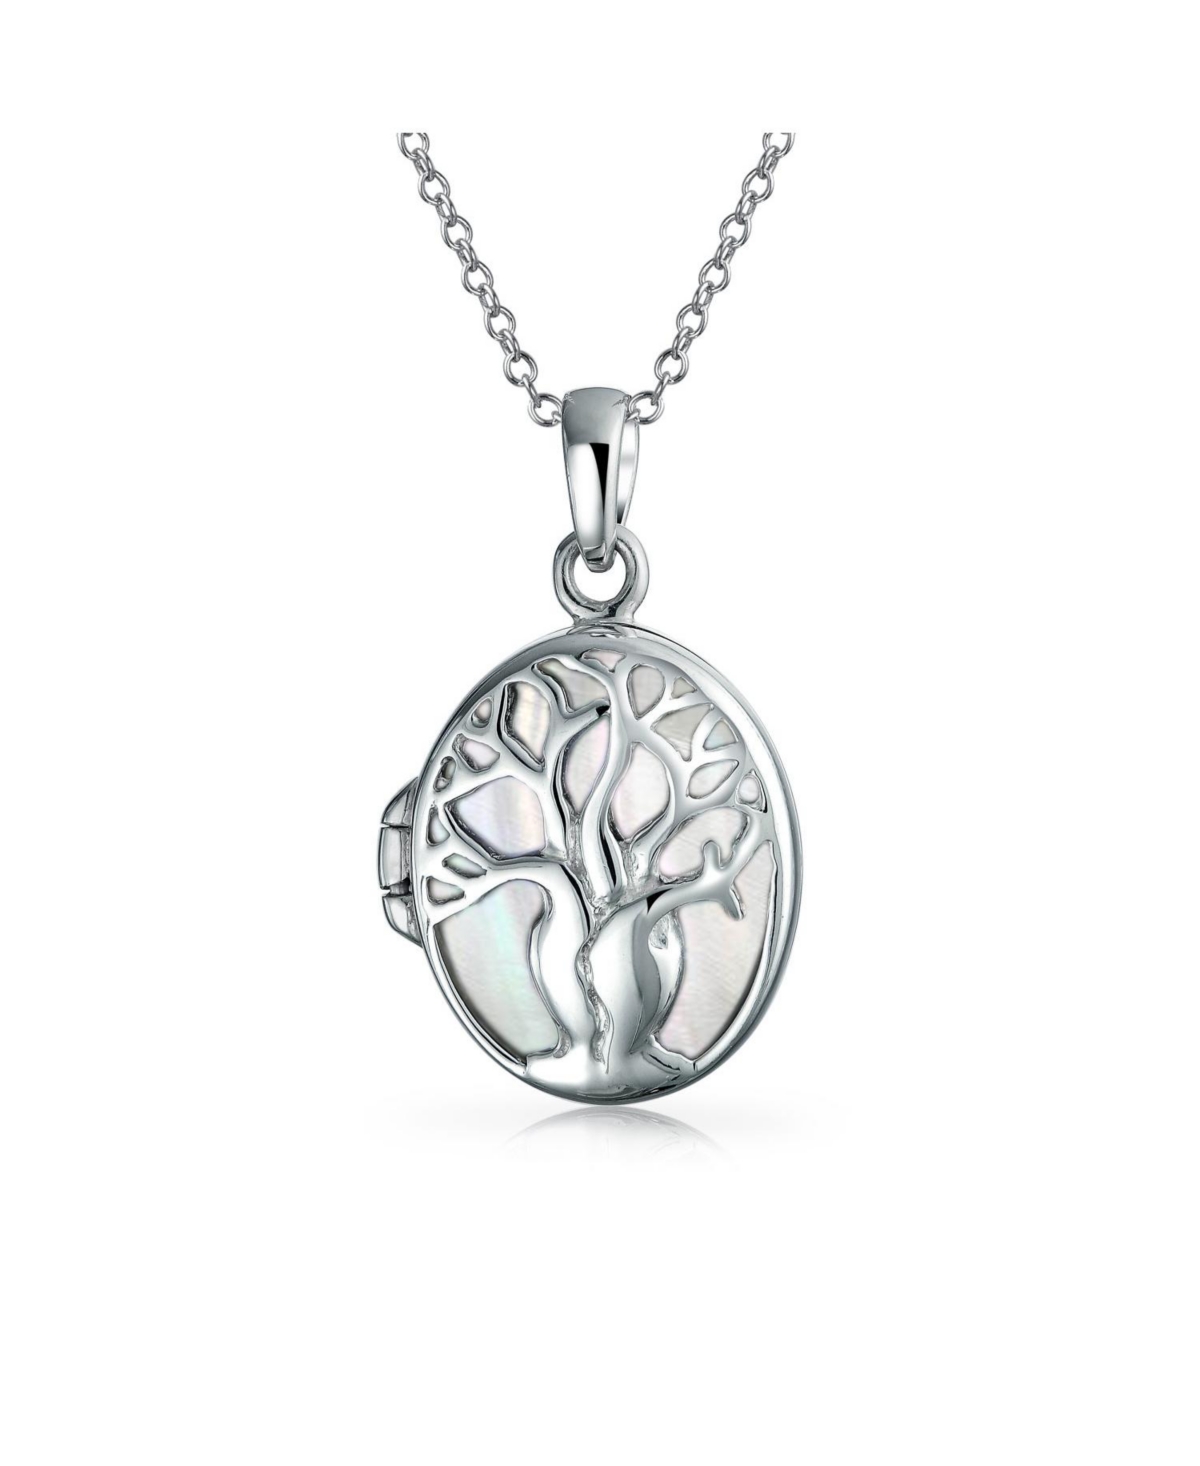 Matriarch Rainbow Abalone Mother Of Pearl Oval Celtic Tree Family Tree Of Life Locket Holds Photos Necklace For Women .925 Sterling Silv